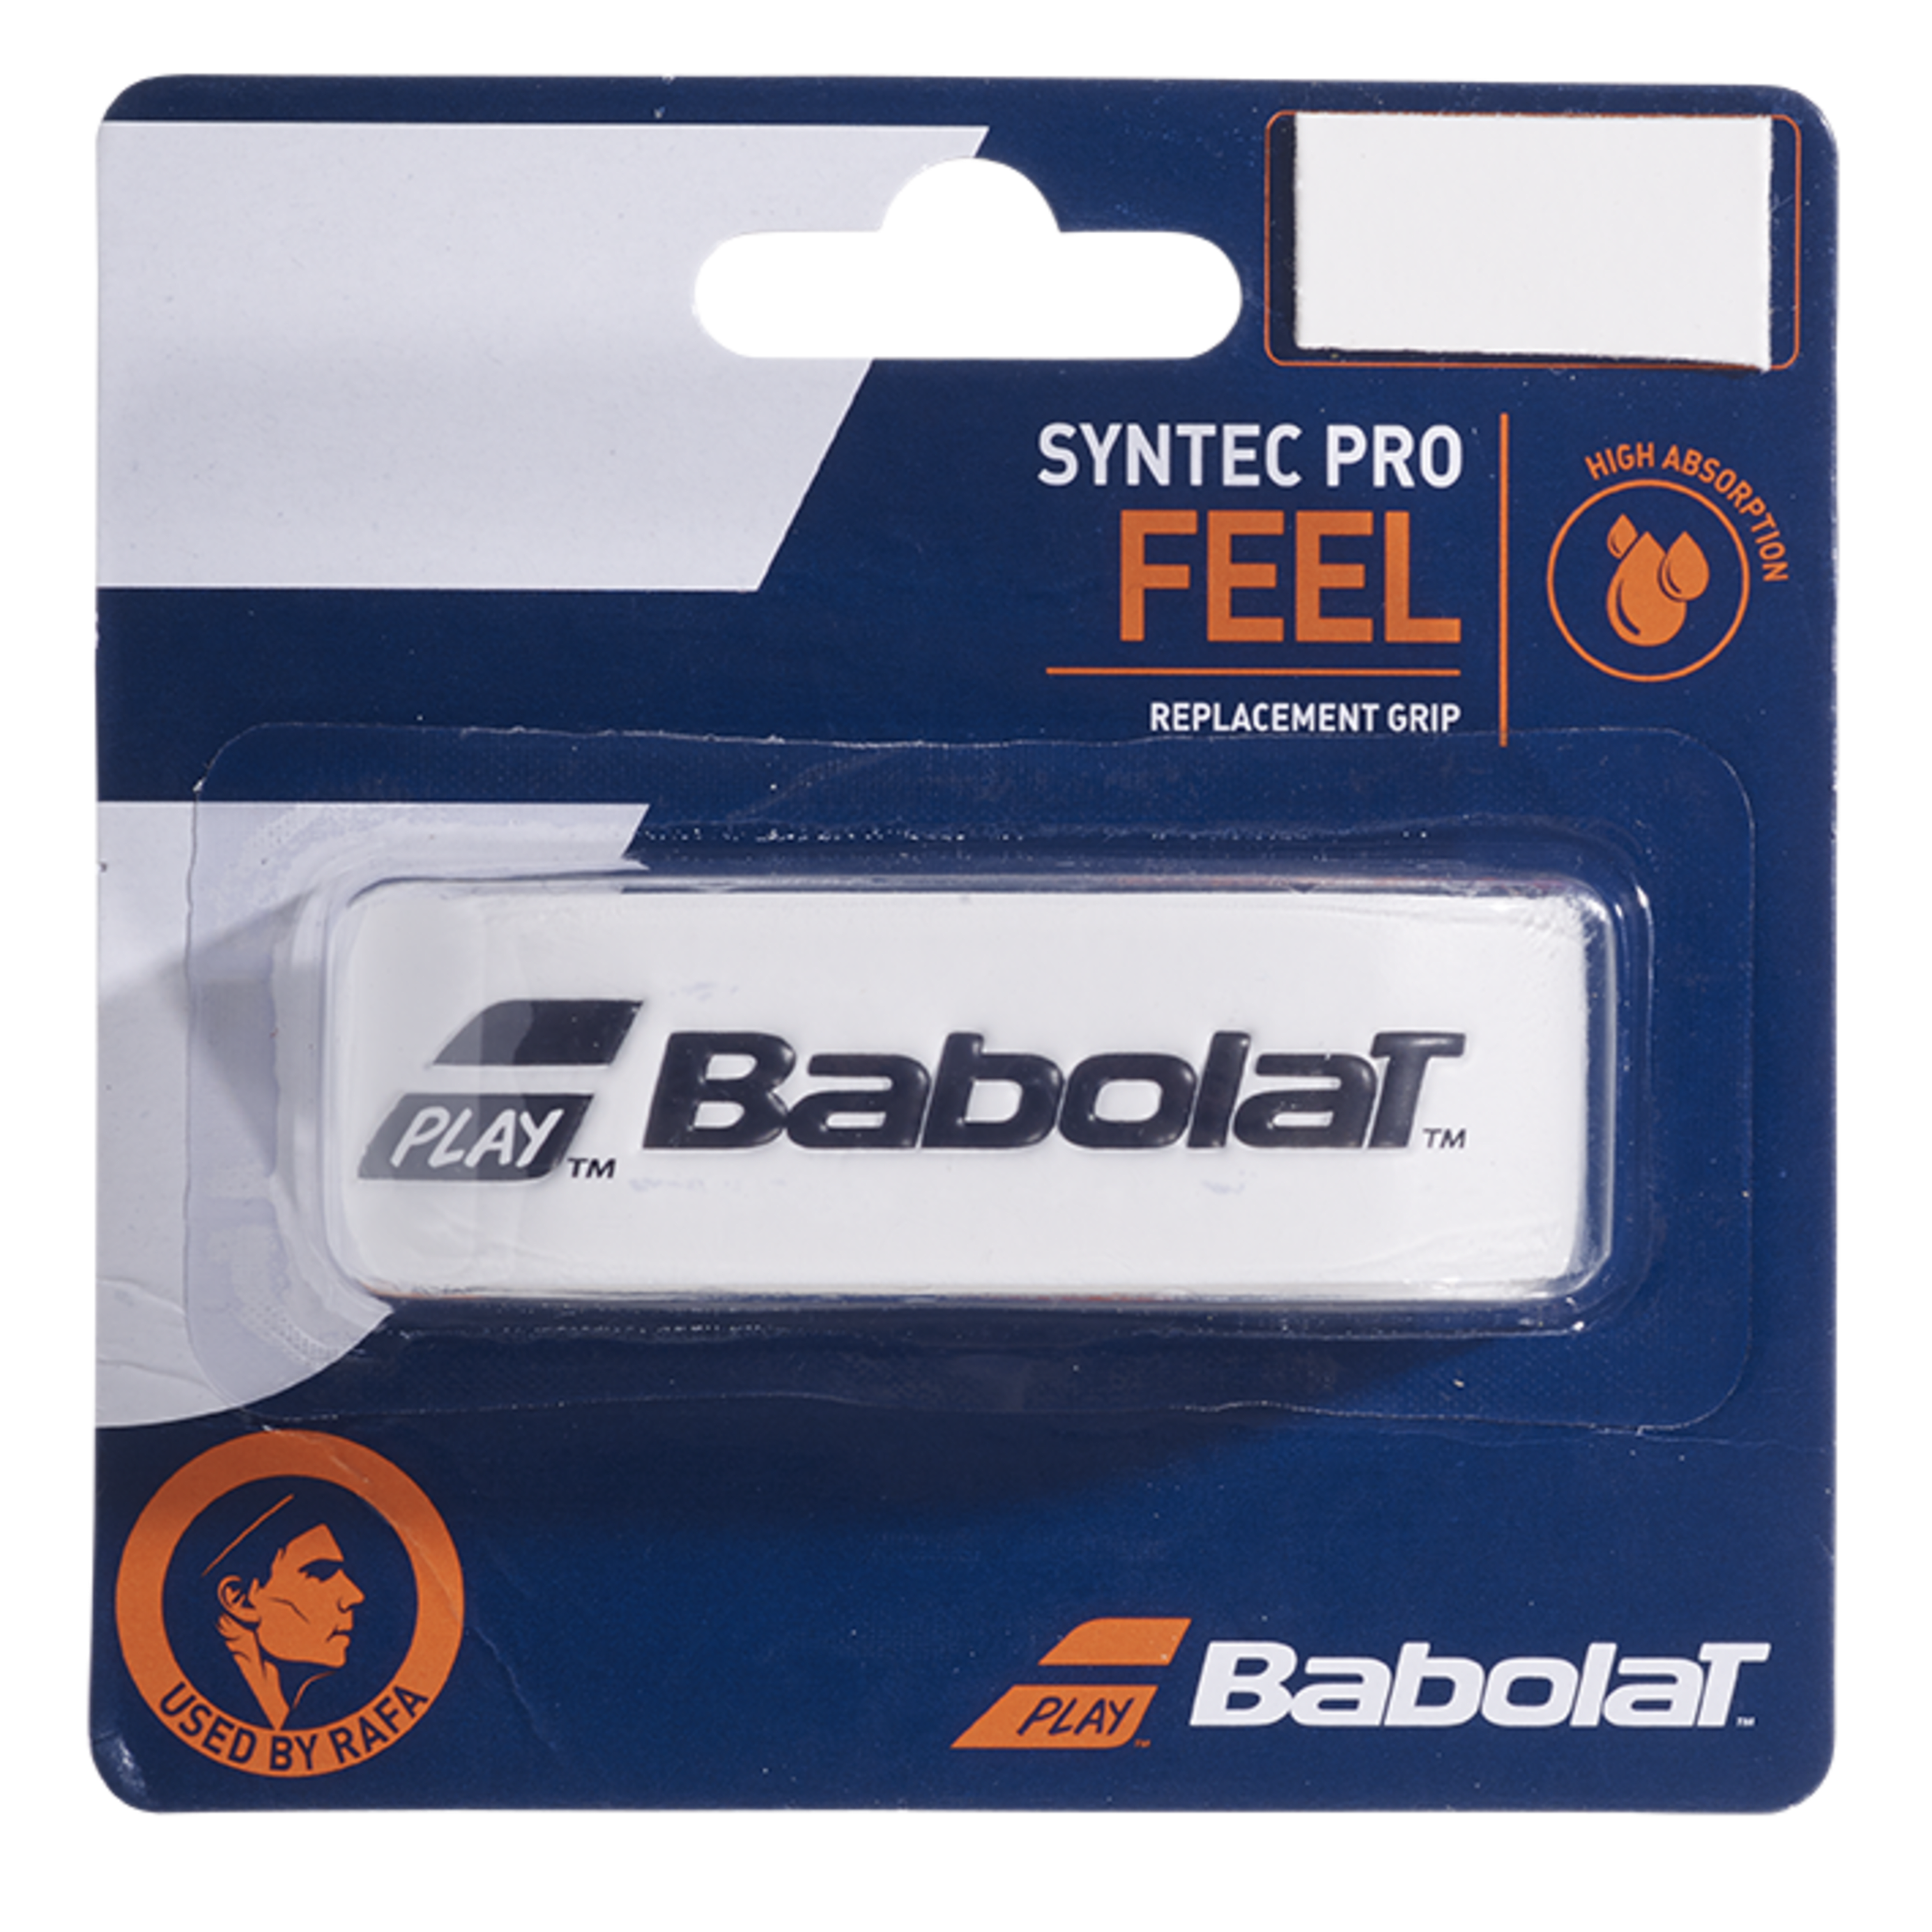 FEEL RRP £15 3324921706689 BLACK WITH SILVER LOGO Babolat BABOLAT SYNTEC PRO REPLACEMENT GRIP 